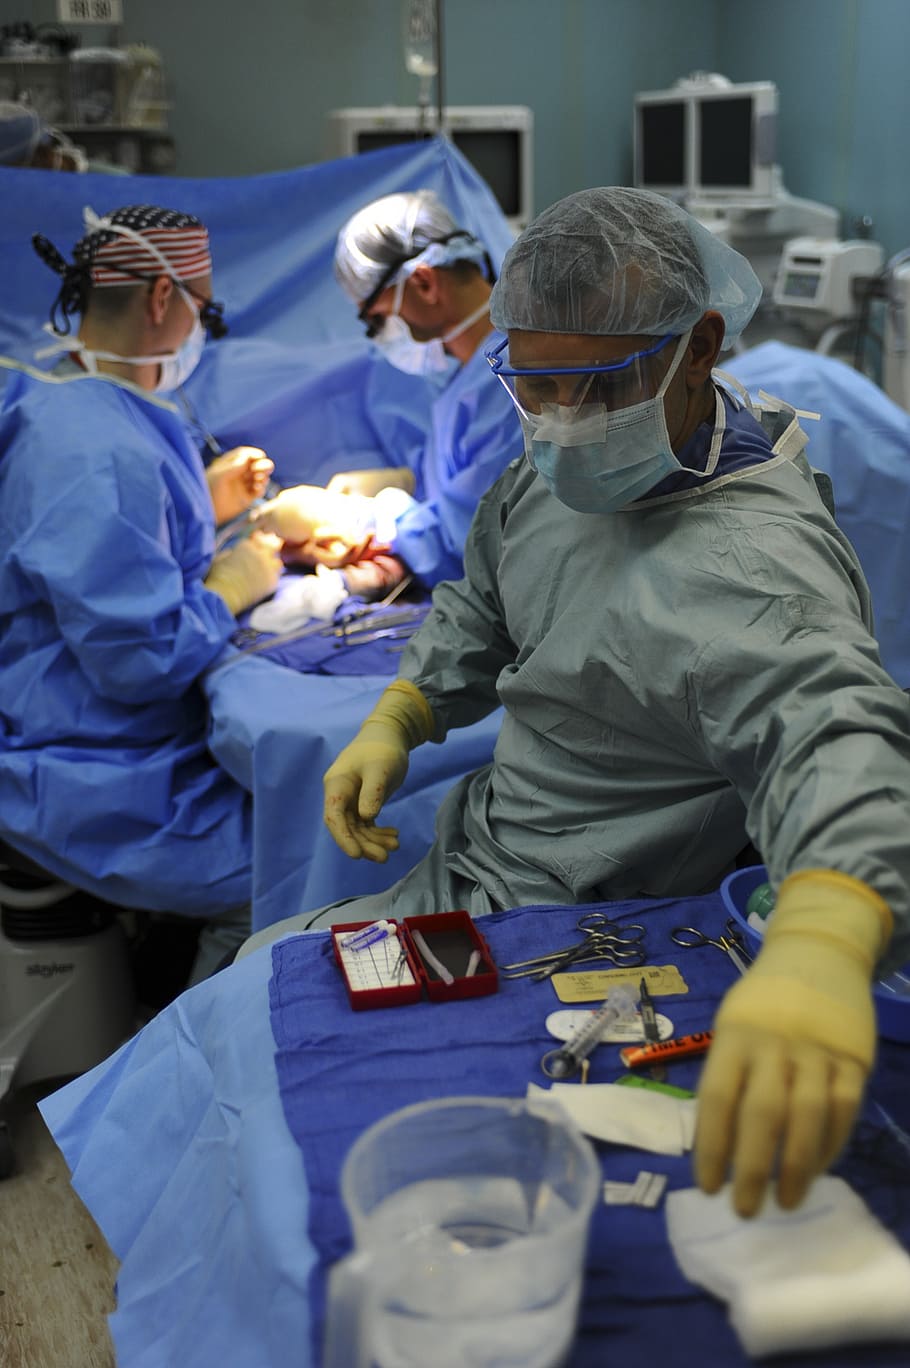 three doctors during medical operation, physician, surgery, nurse